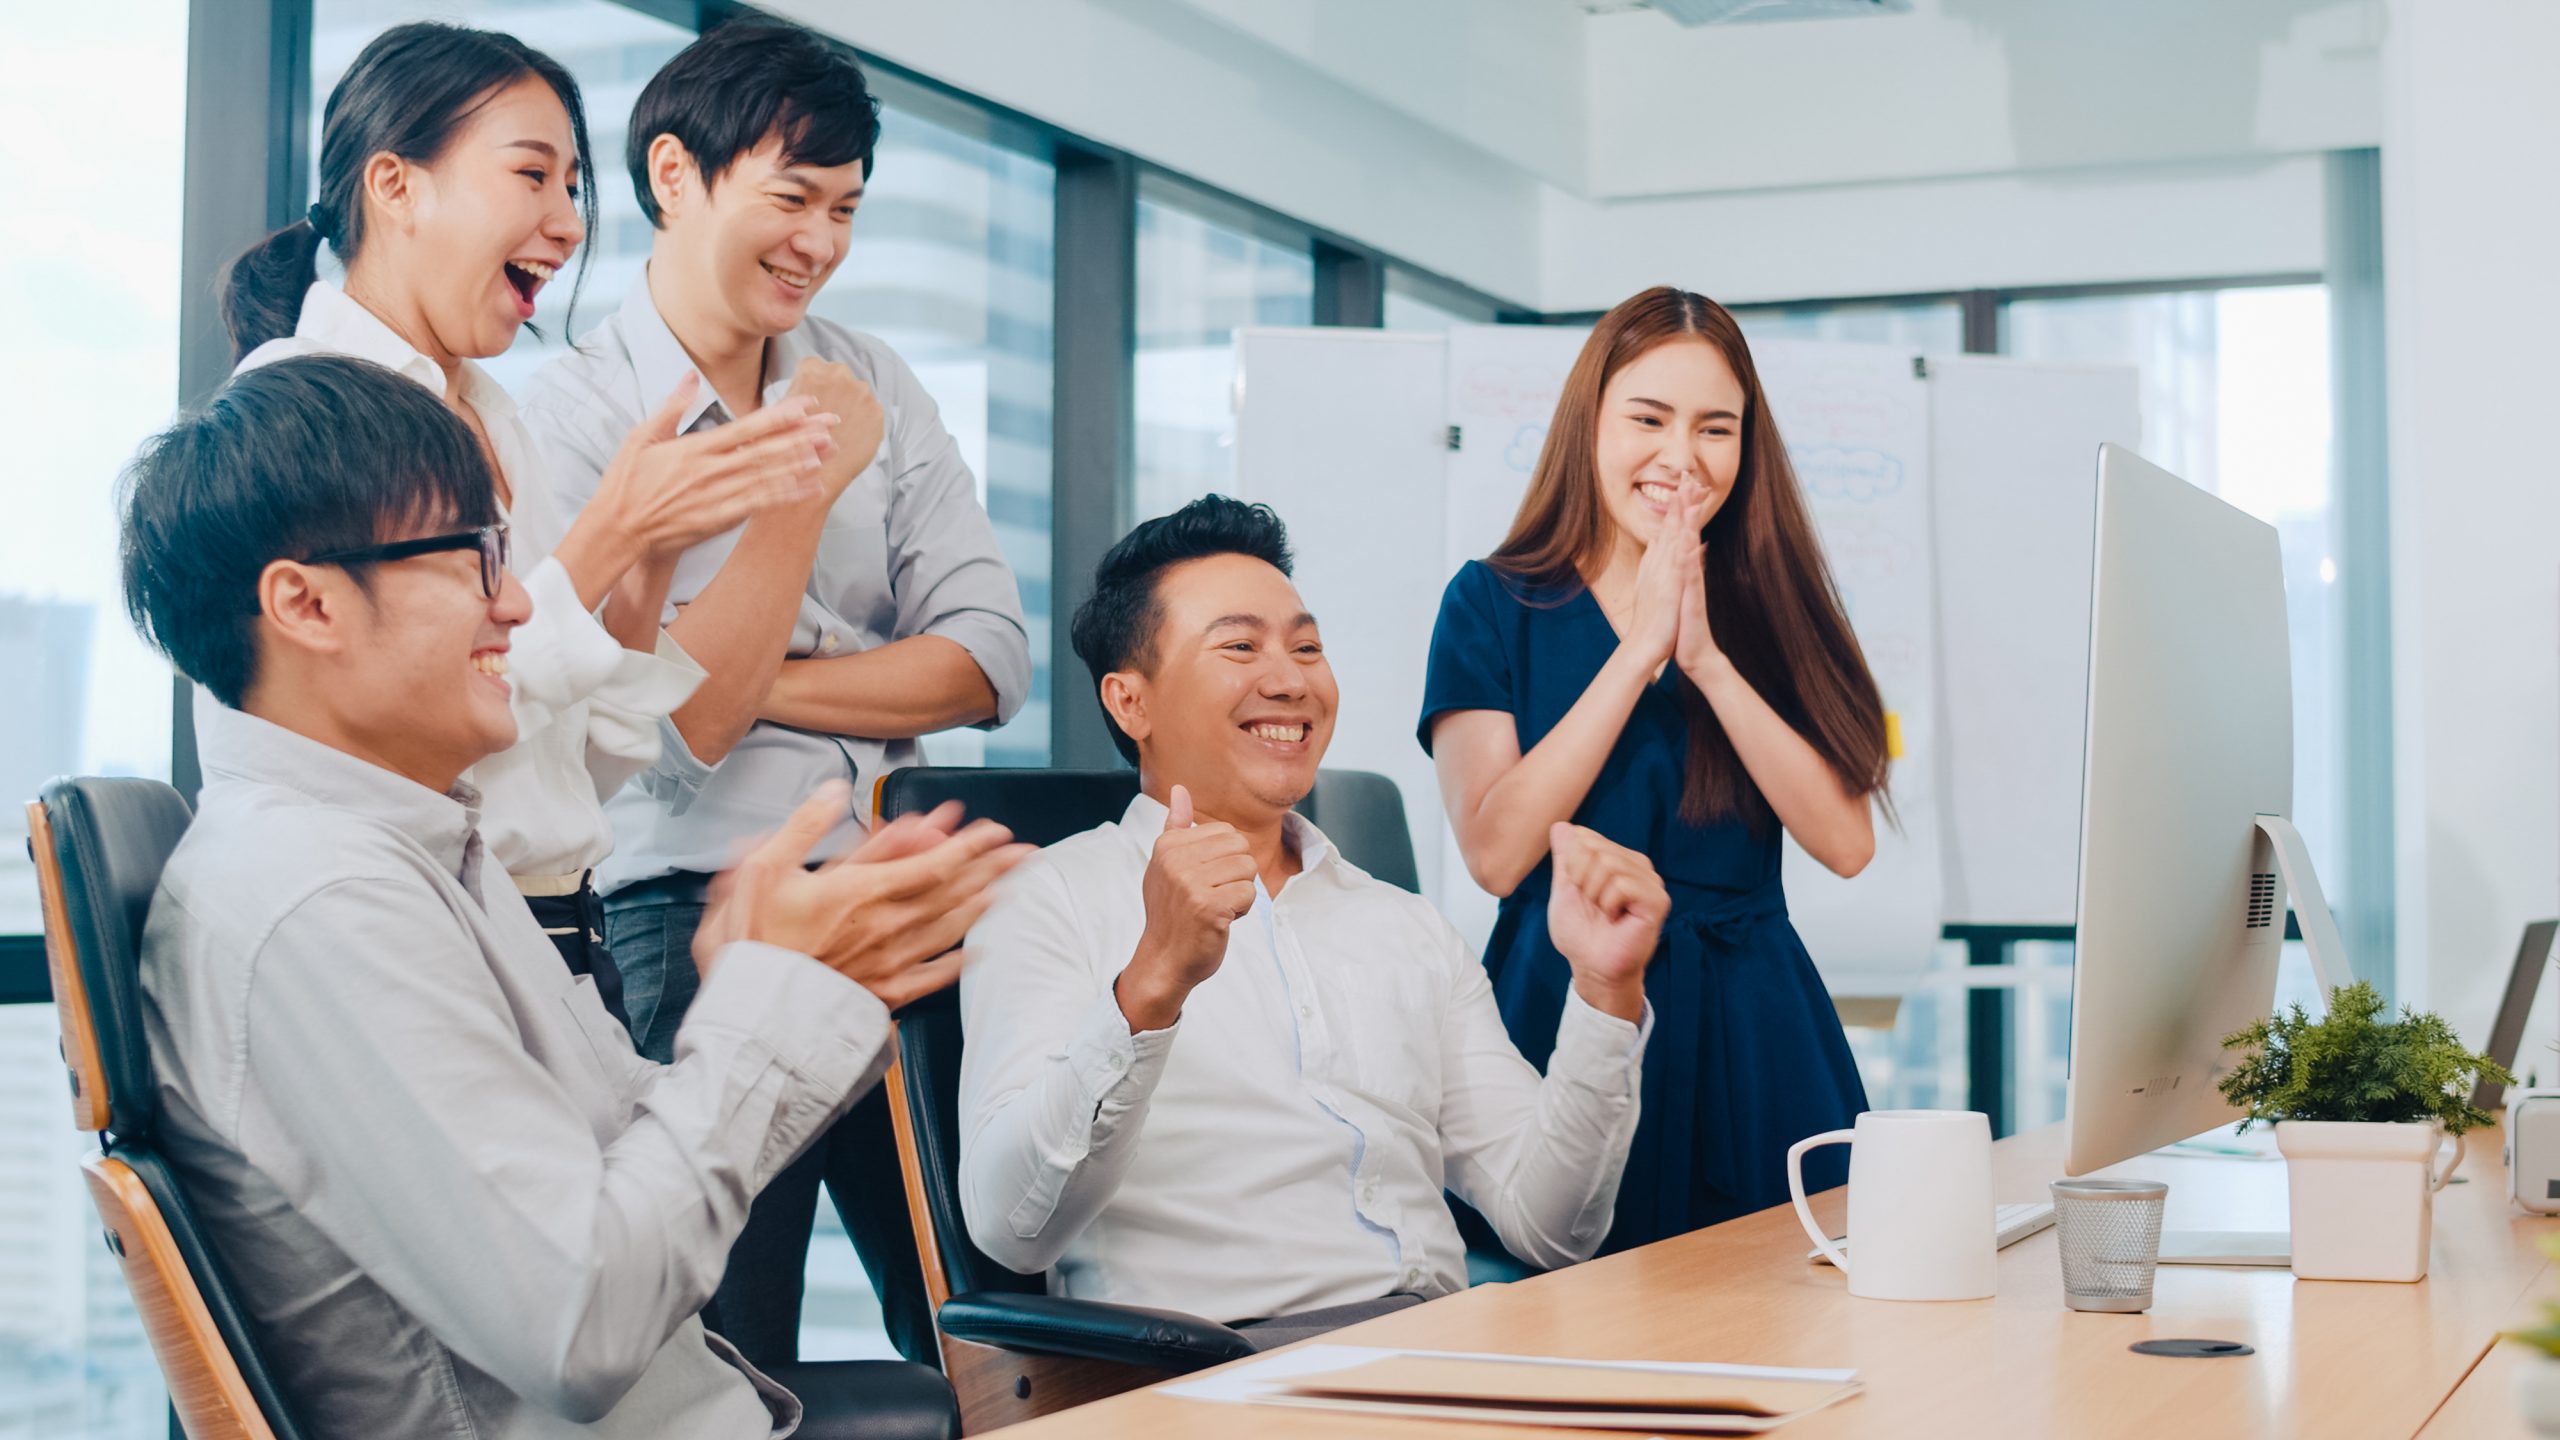 Millennial group of young businesspeople Asia businessman and businesswoman celebrate giving five after dealing feeling happy and signing contract or agreement at meeting room in small modern office.